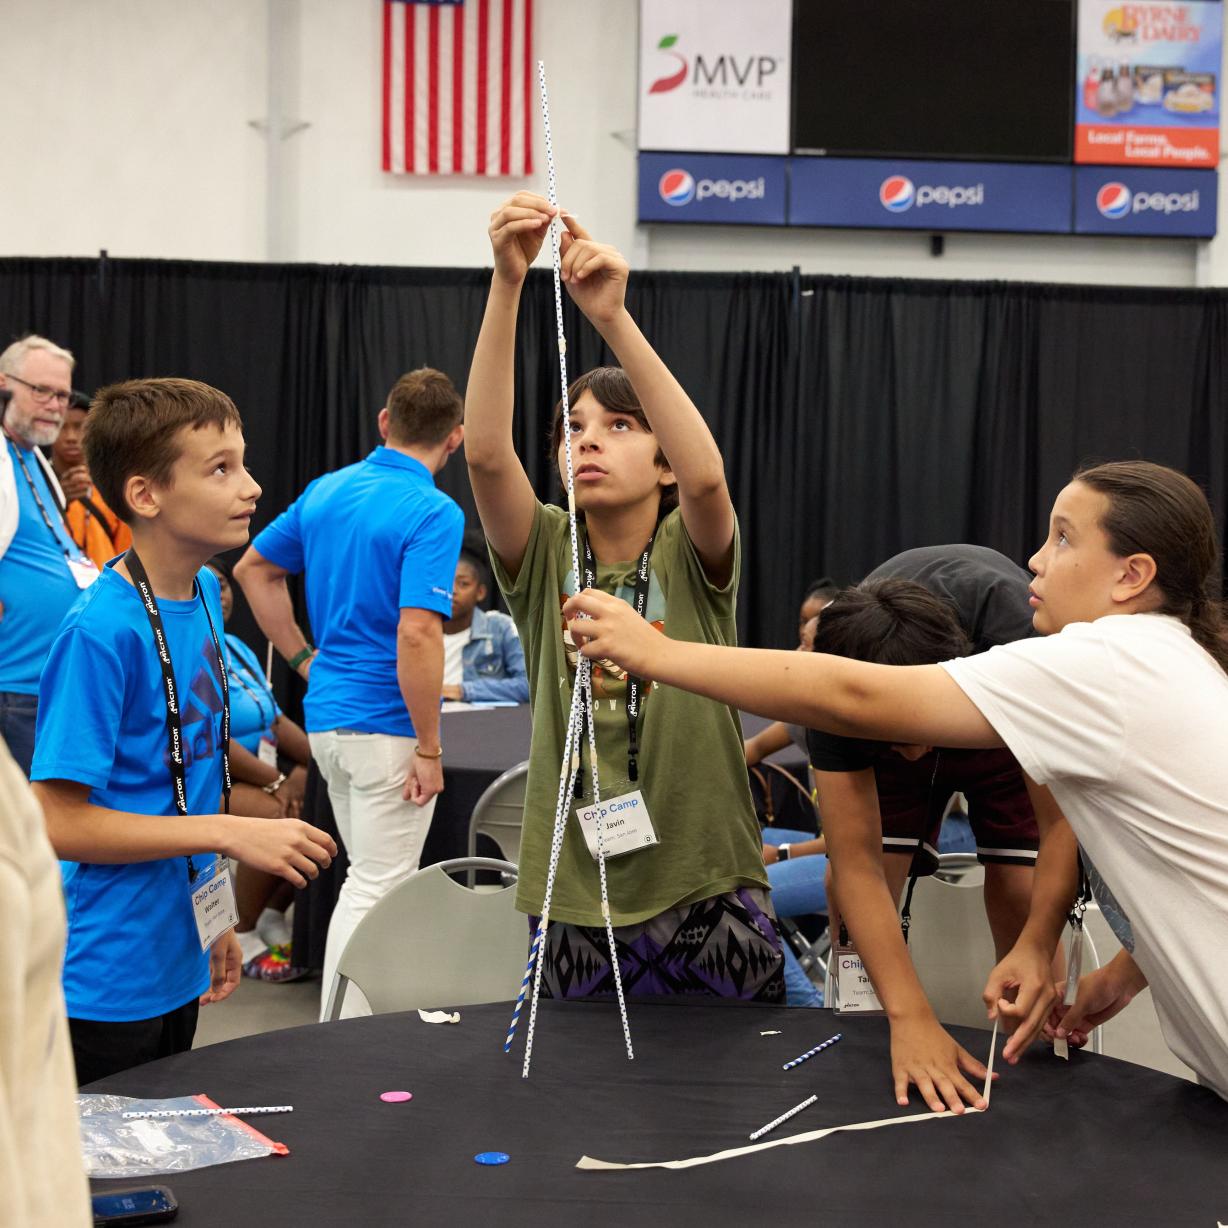 Students work together during the Straw Challenge at Micron-sponsored Chip Camp on the OCC campus.